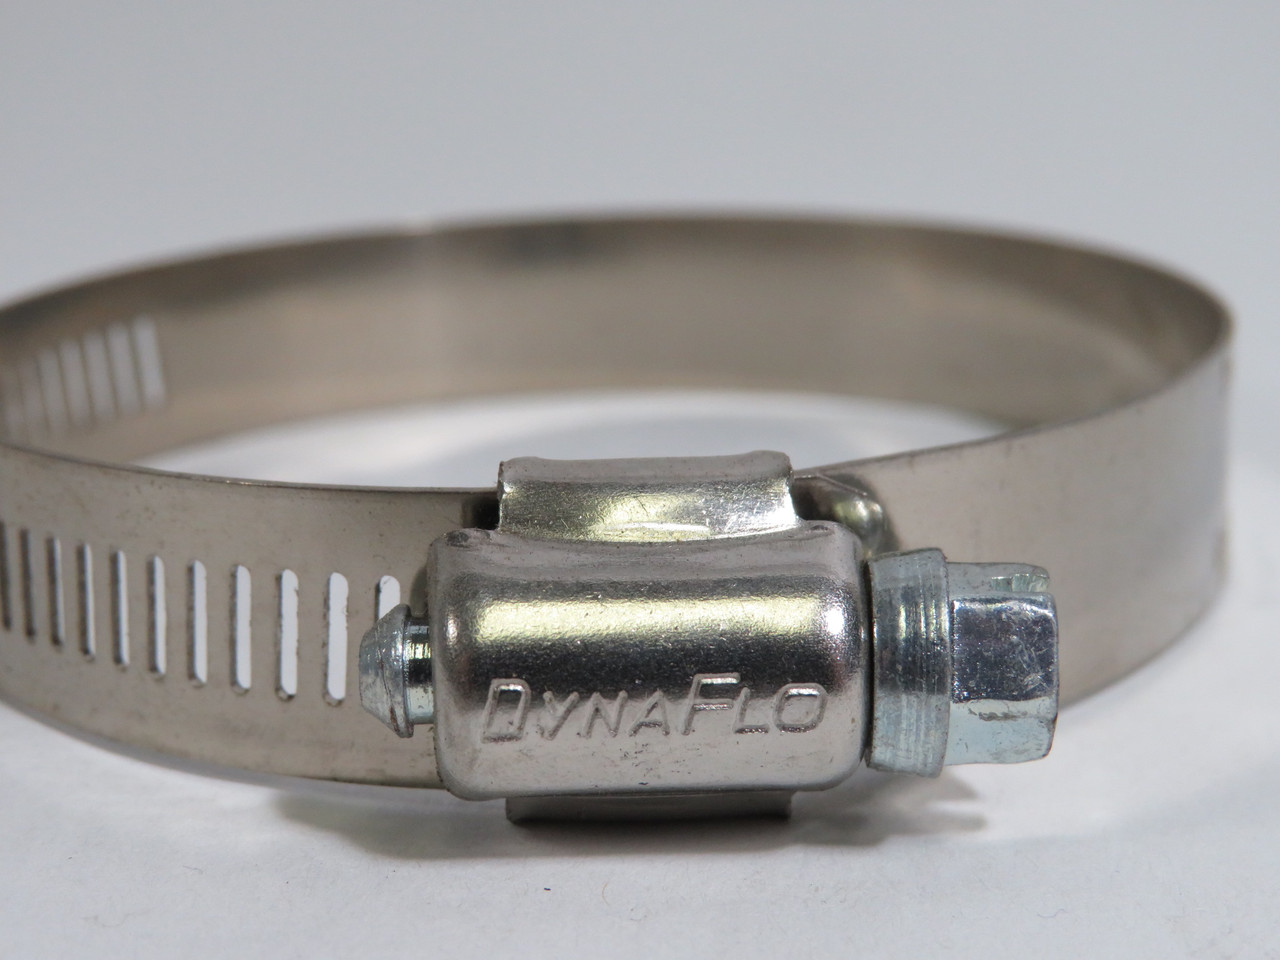 Dynaflo Size 40 Stainless Steel Worm Drive Clamp 51-76mm USED